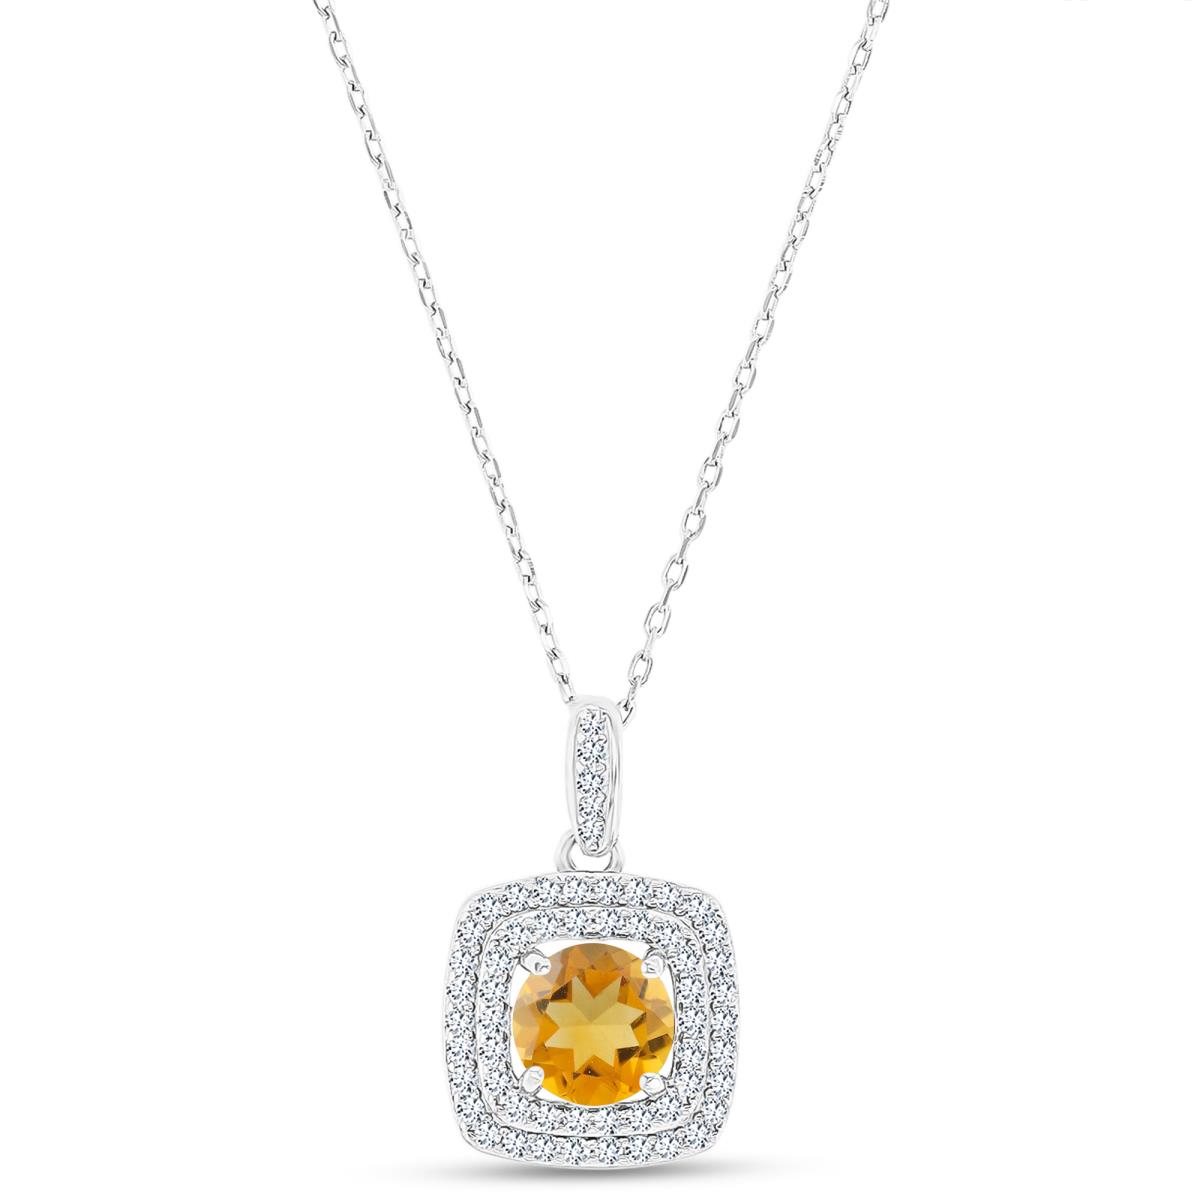 Sterling Silver Rhodium 7mm RD Citrine/ Cr White Sapphire Cushion Double Halo 16"+2" Necklace